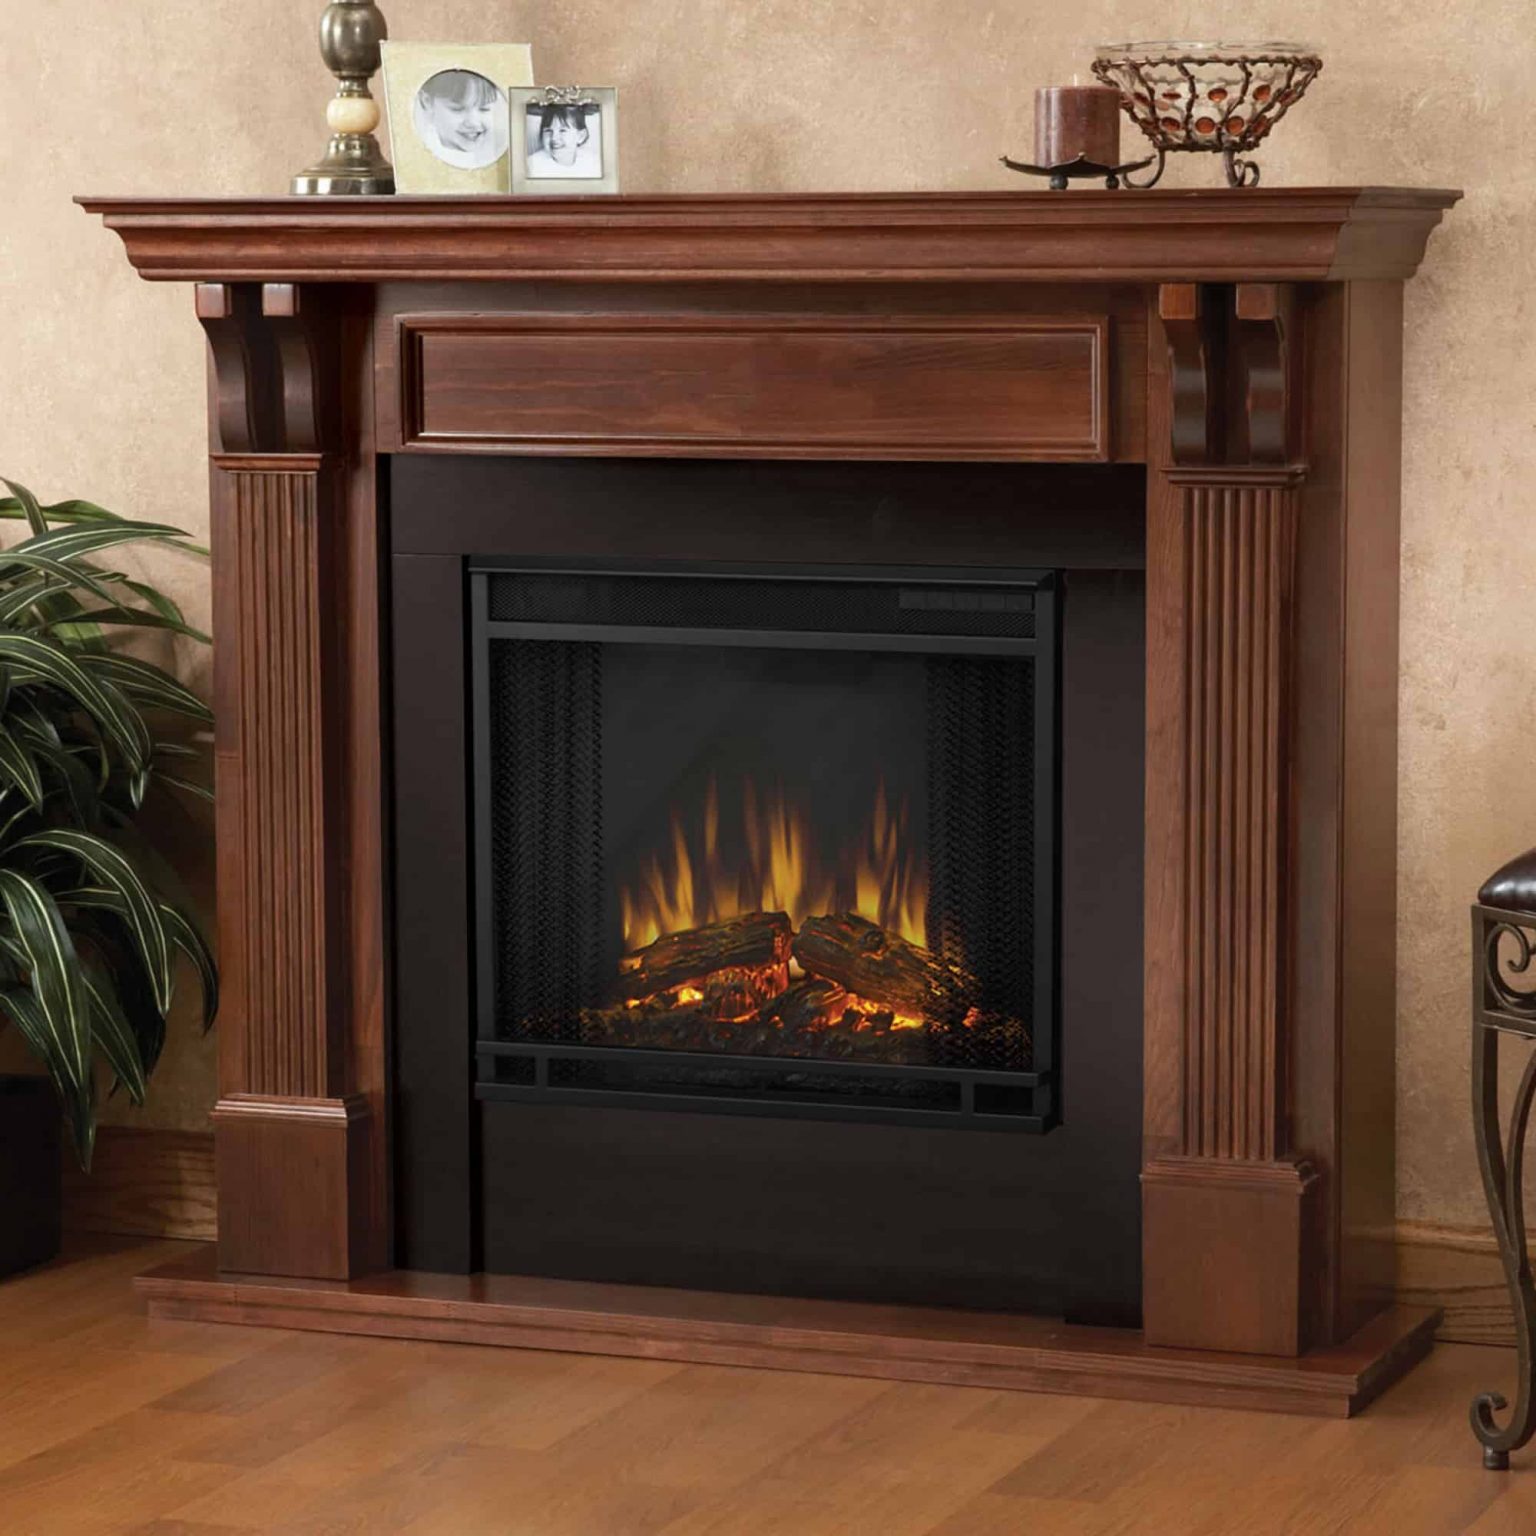 Fireplace and stove for your home